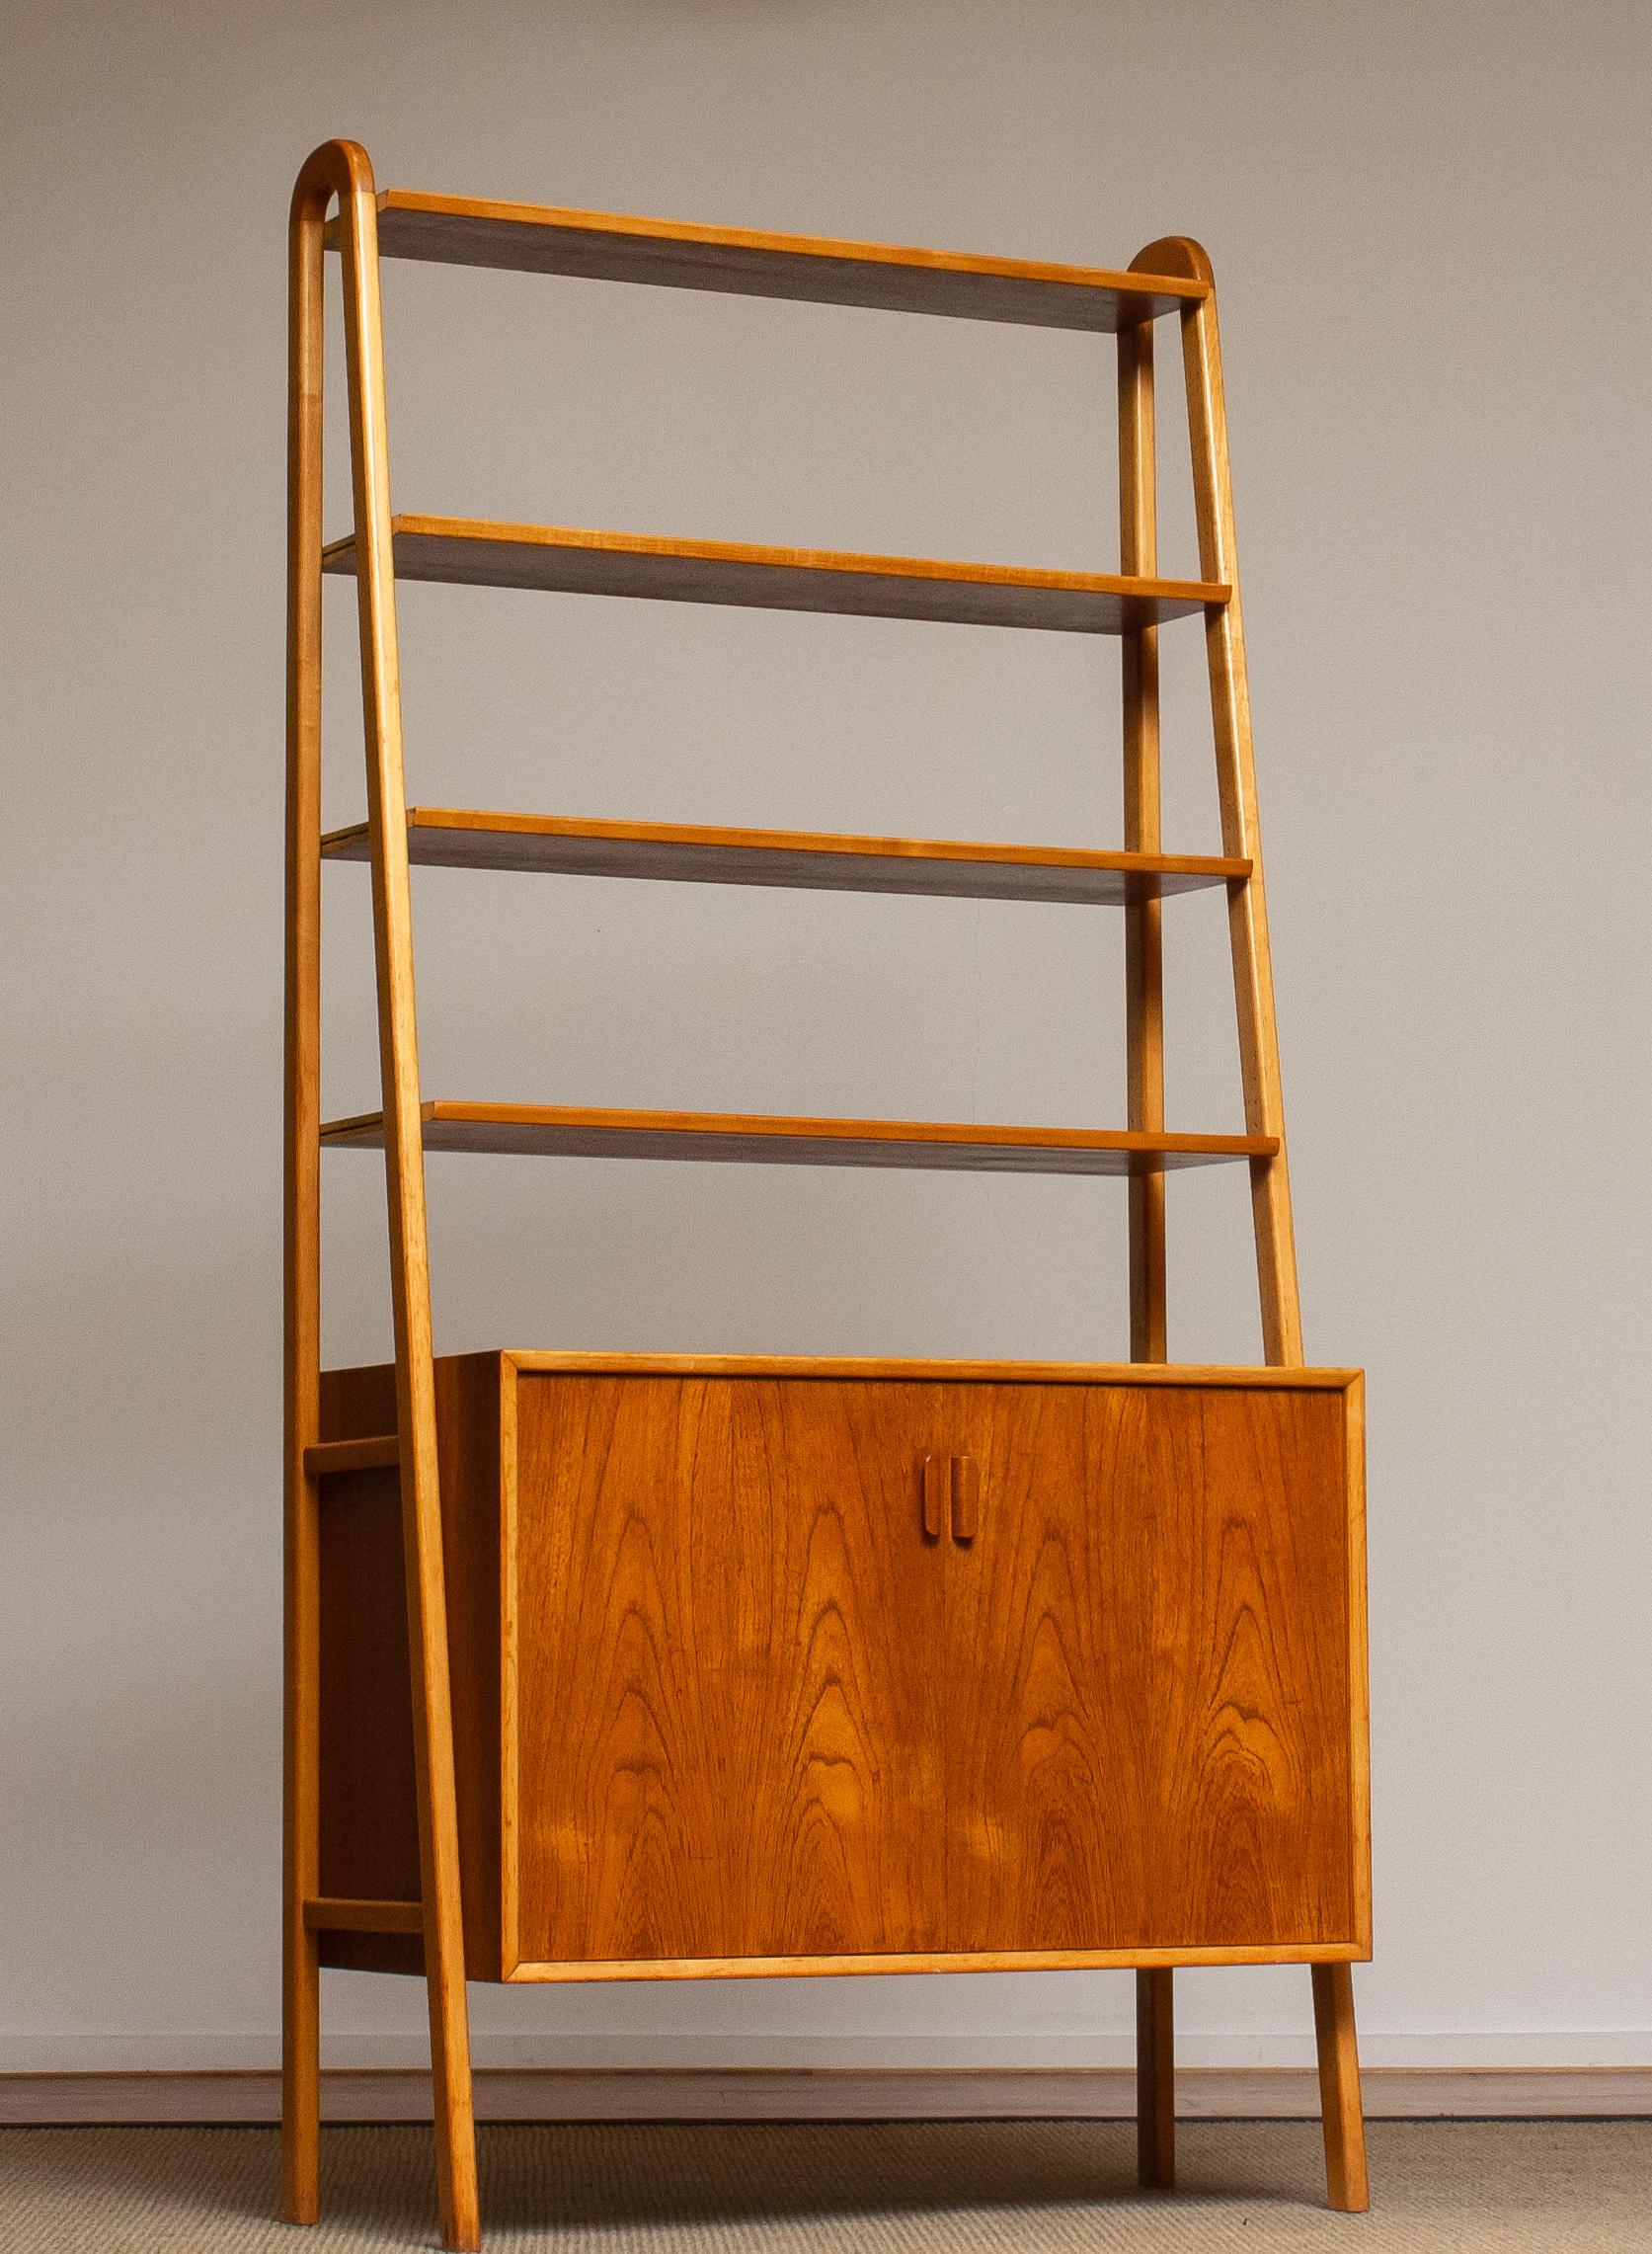 Beautiful and typical Swedish slim bookcase / shelfs cabinet in teak in combination with beech stands made by Brantorps, Sweden.
This cabinet consists four shelfs in which three are adjustable. The top shelf is fixed.
There is also an adjustable /